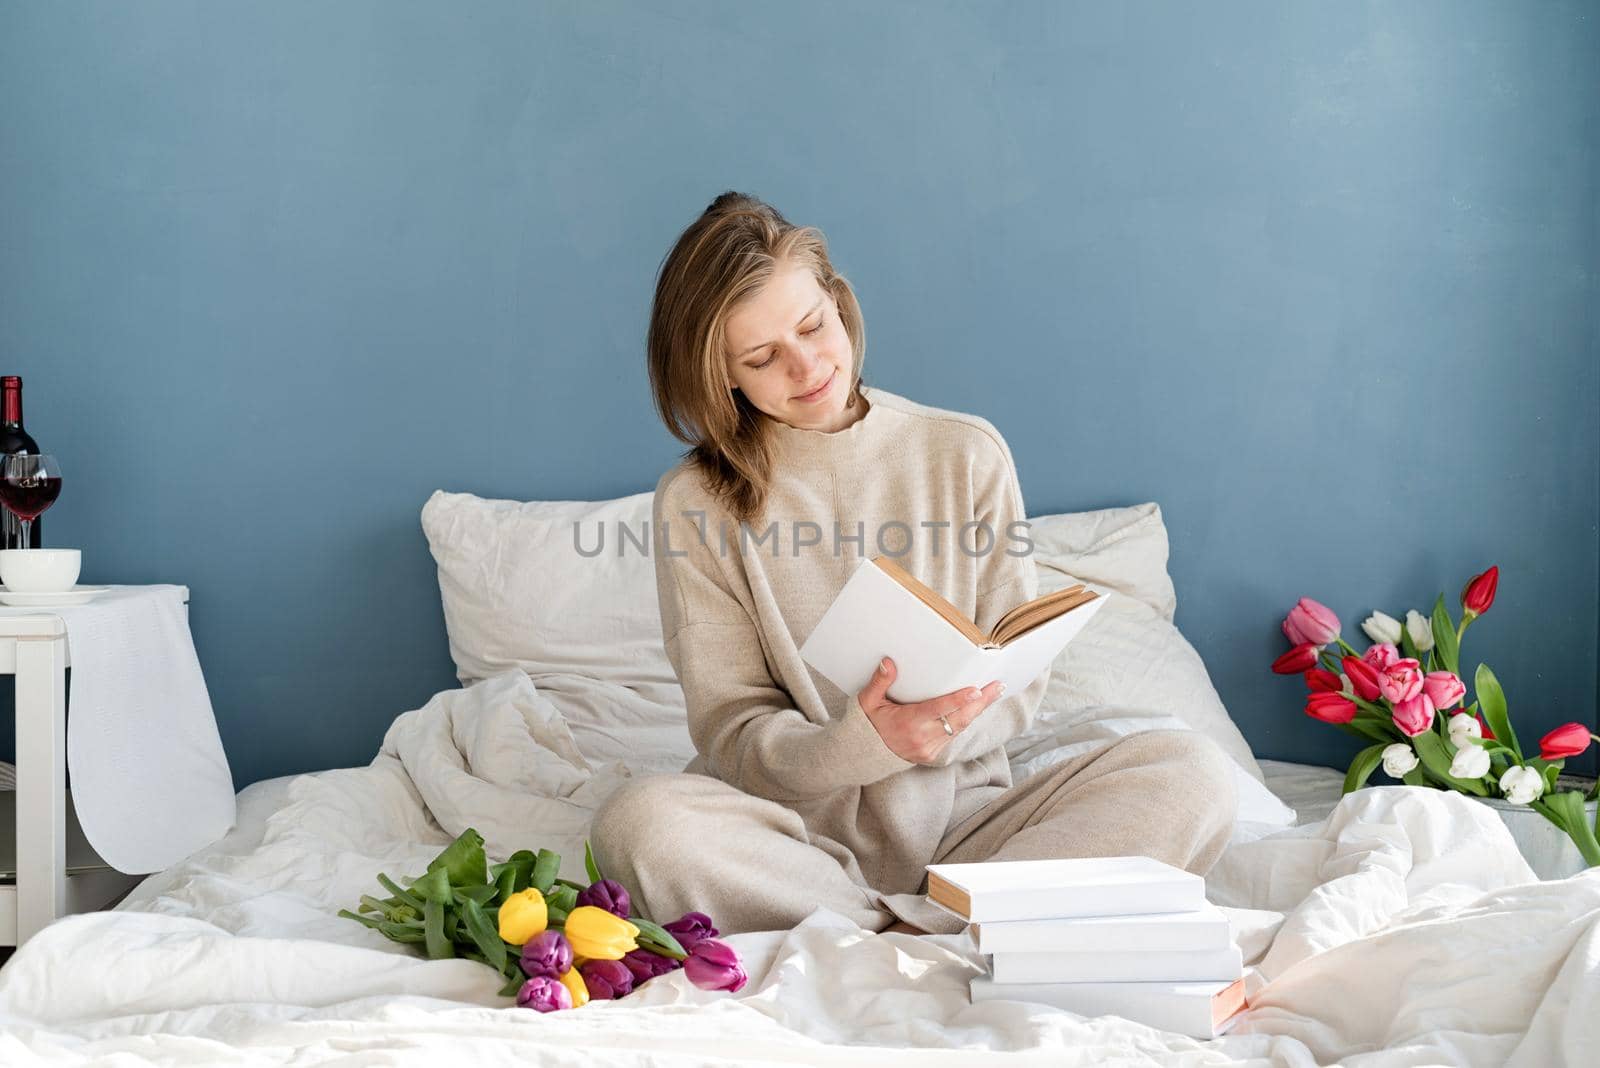 Happy smiling woman sitting on the bed wearing pajamas, with pleasure enjoying flowers and reading a book